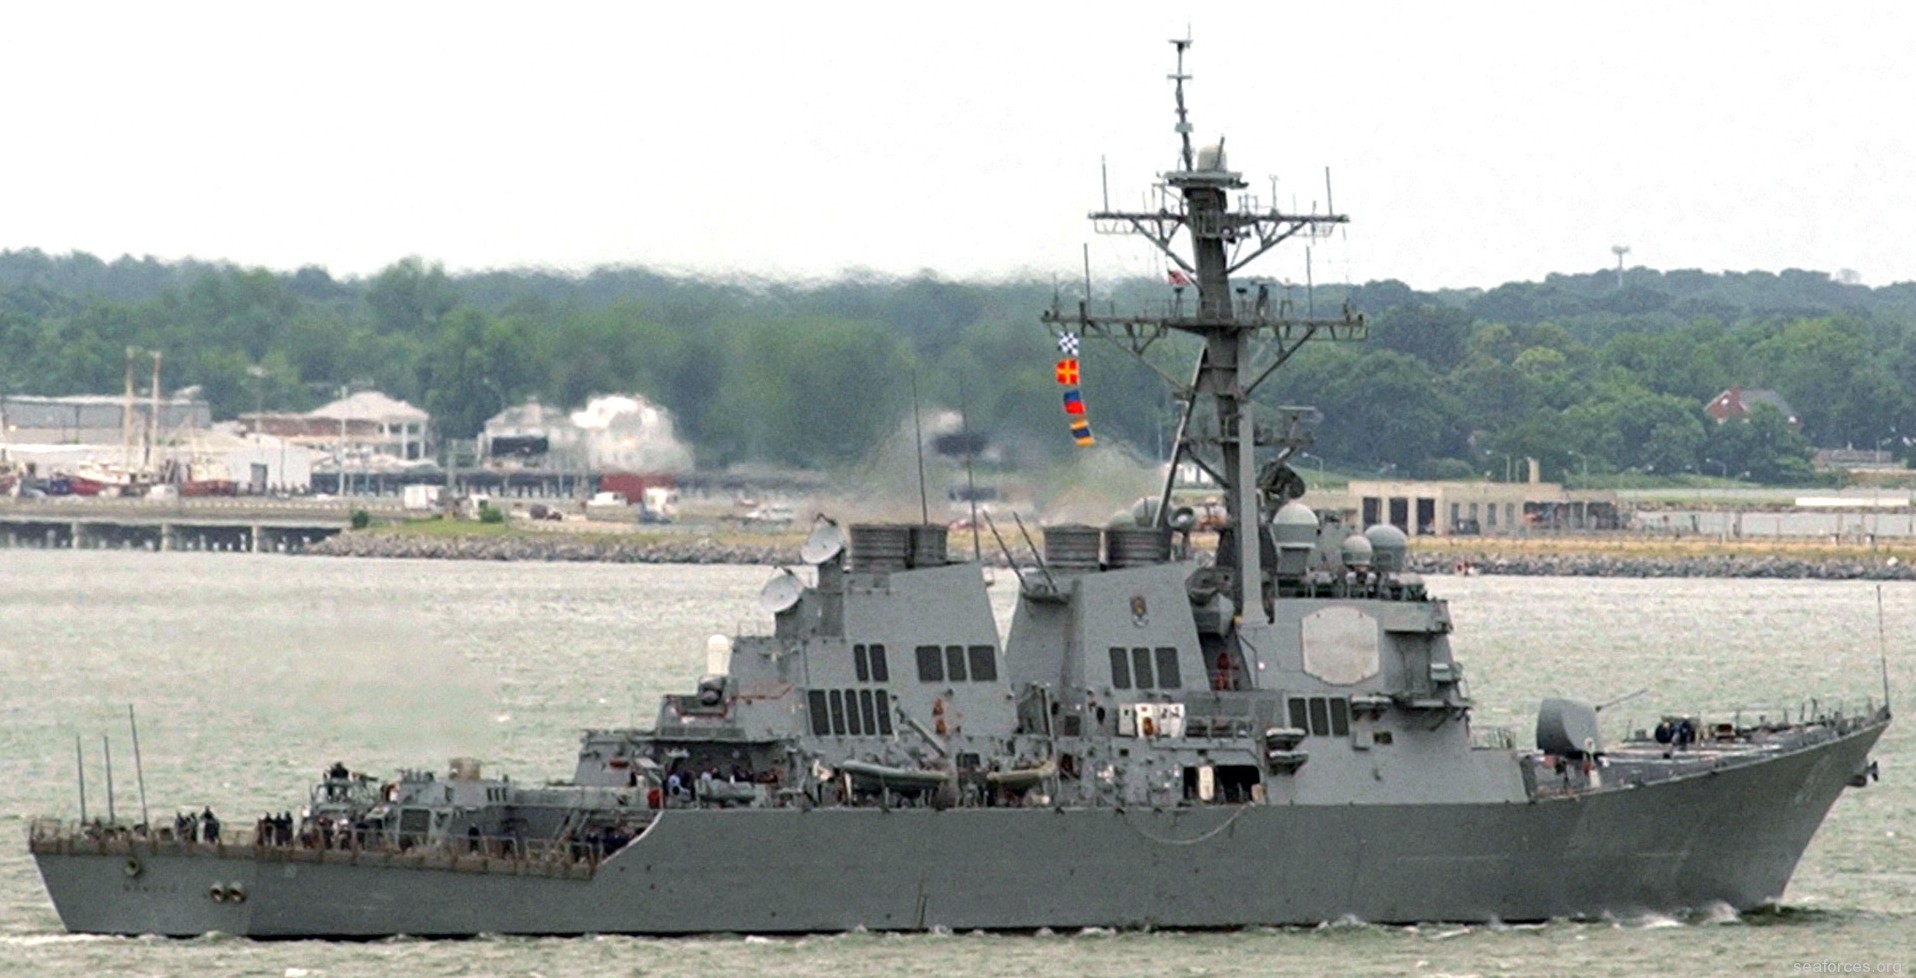 ddg-61 uss ramage guided missile destroyer us navy 65a aegis